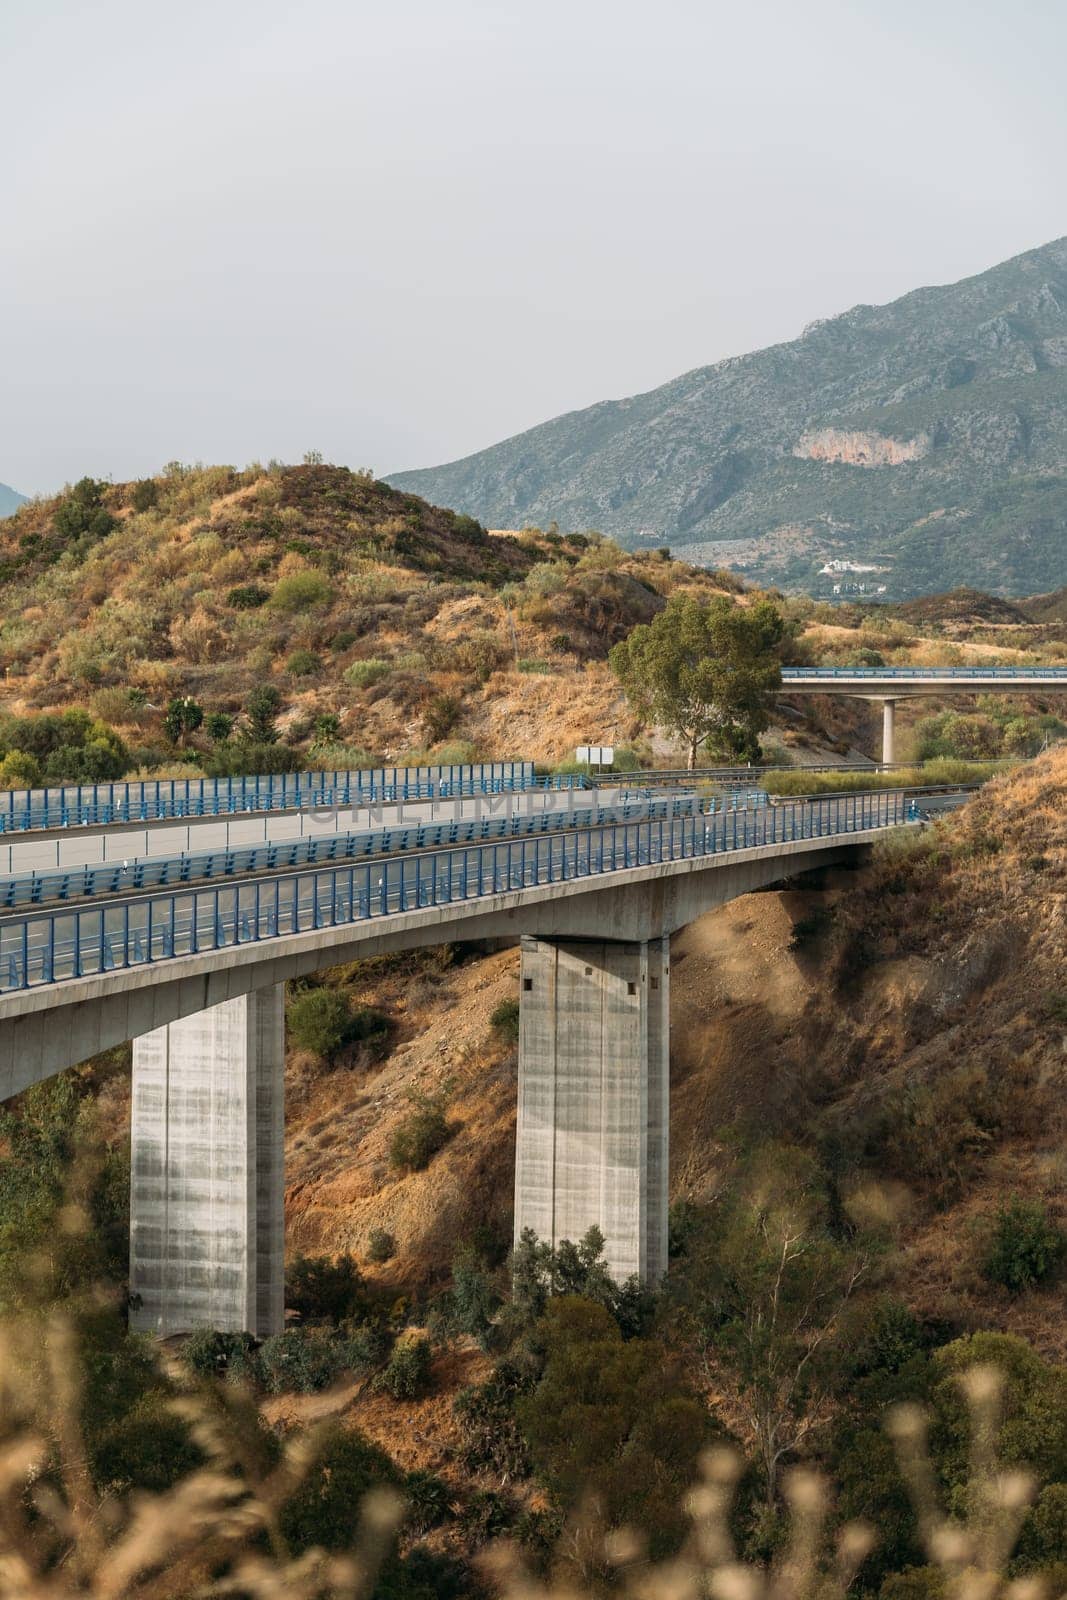 An impressive bridge connecting highway and sky, showcasing architectural marvel in Spain.